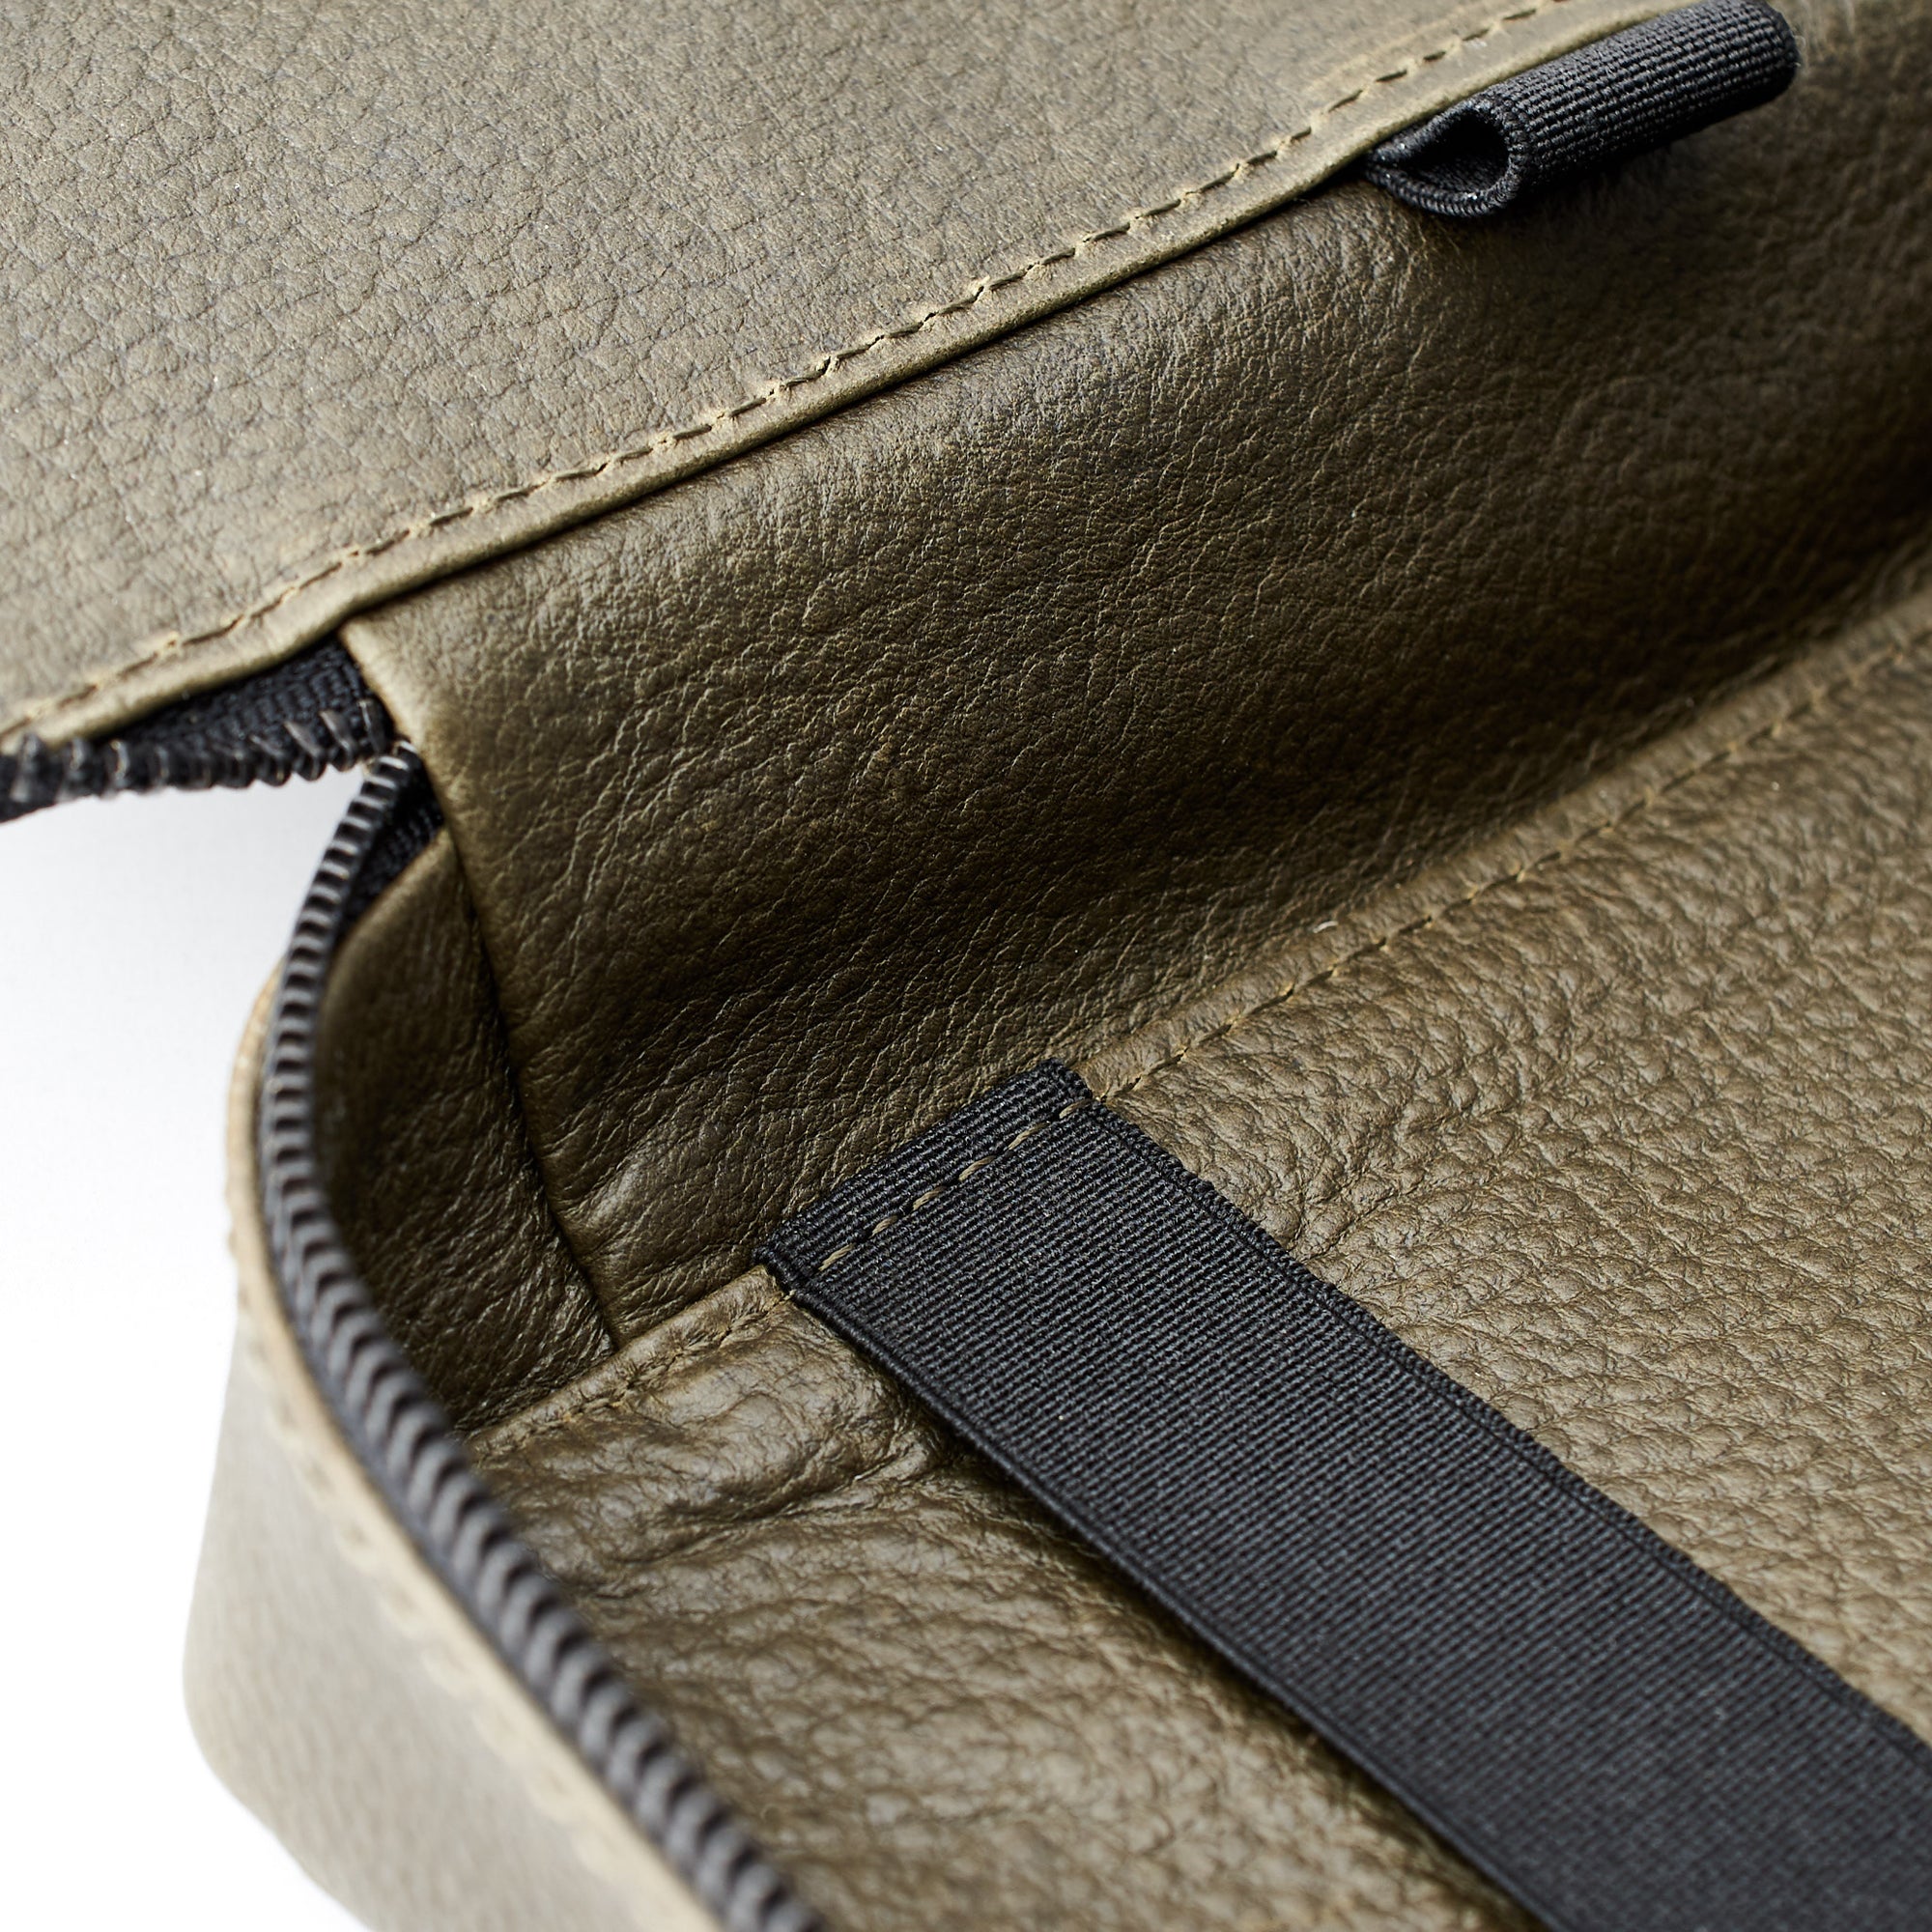 Medium size travel essentials. Green business travel electronics case by Capra Leather